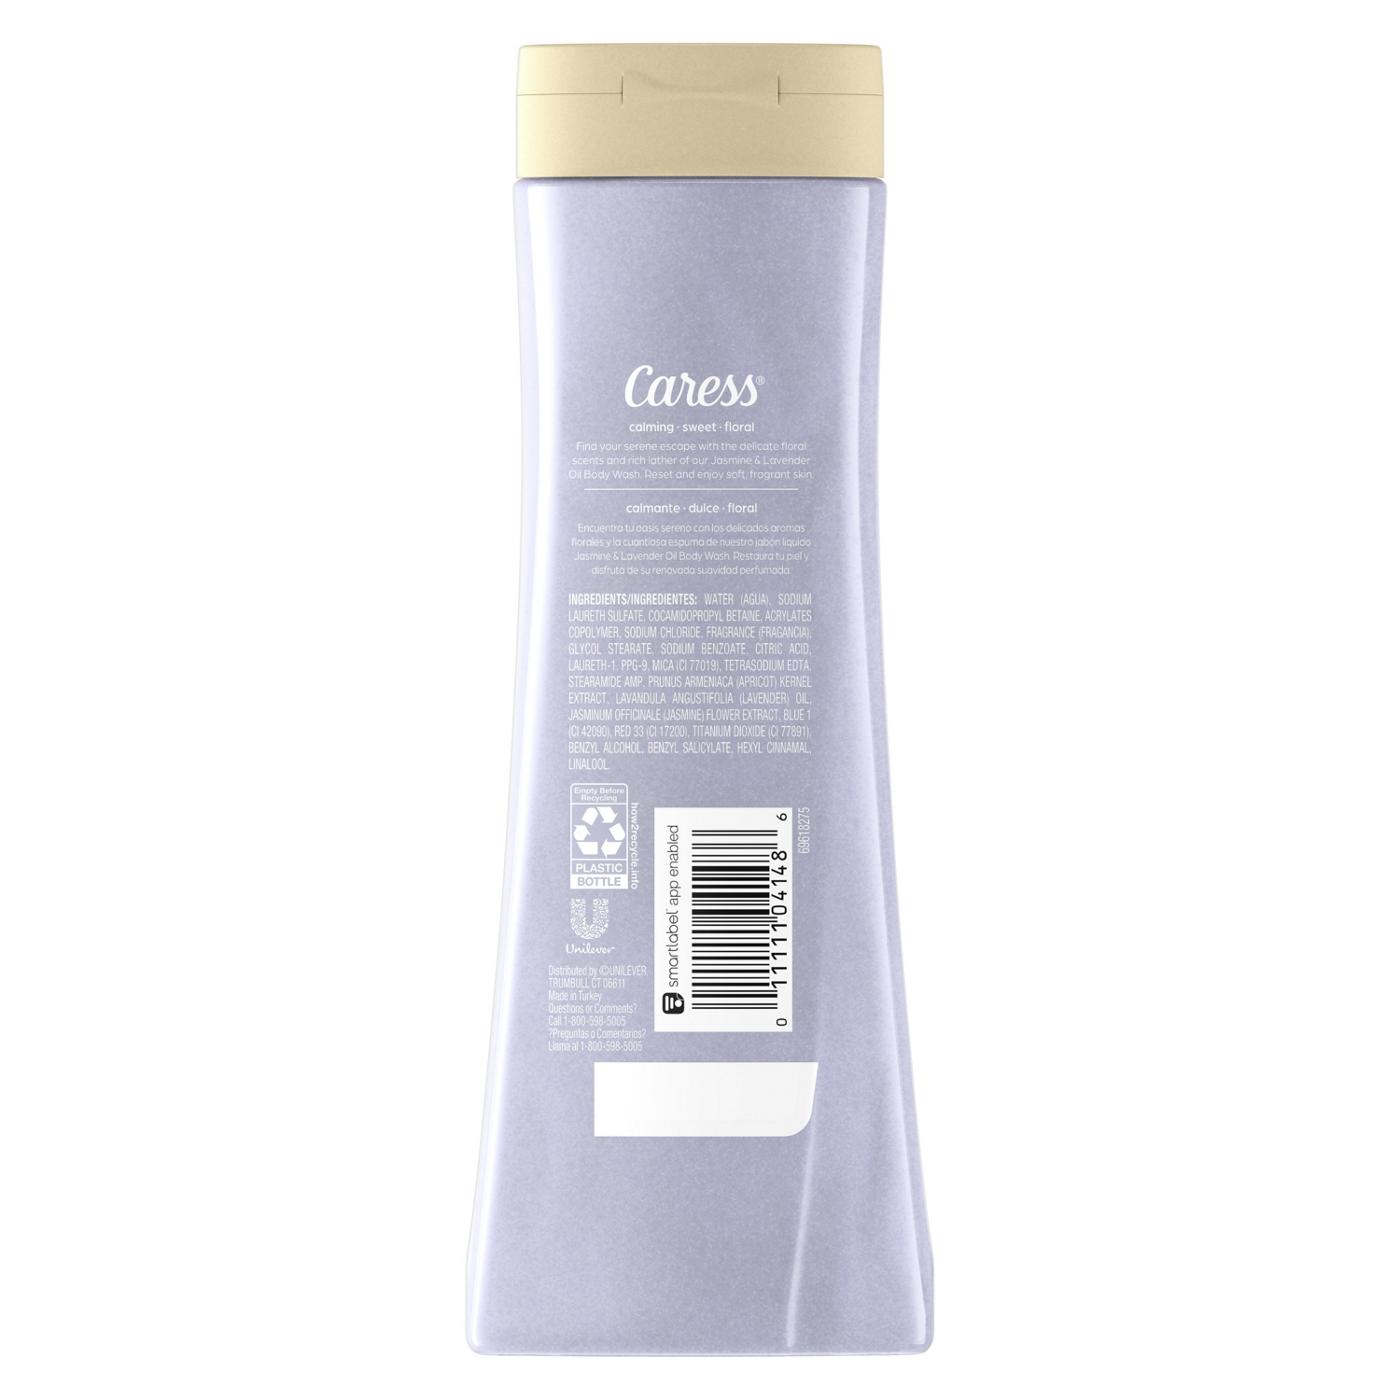 Caress Relaxing Body Wash - Jasmine and Lavender Oil; image 6 of 7